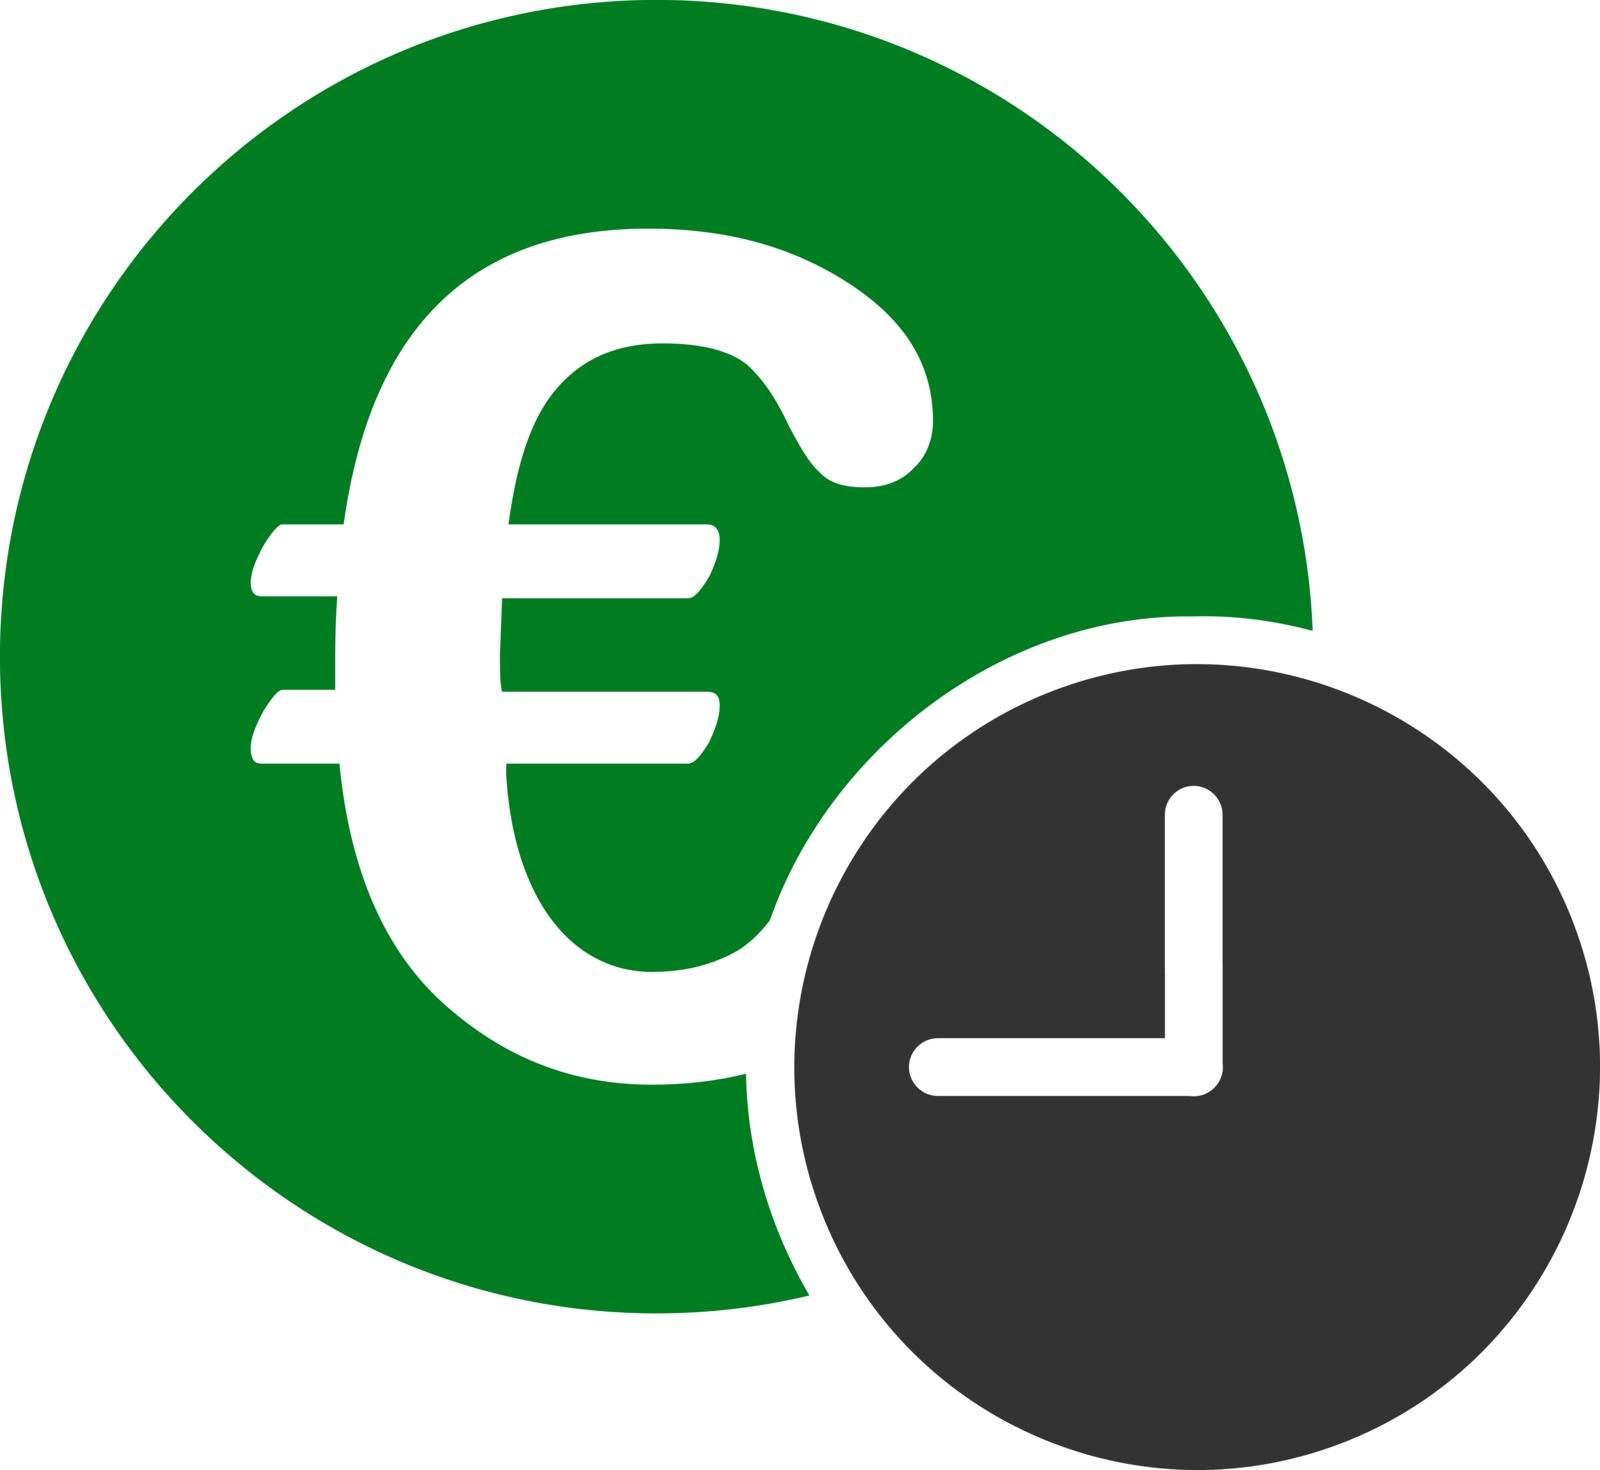 Euro credit icon from Business Bicolor Set by ahasoft